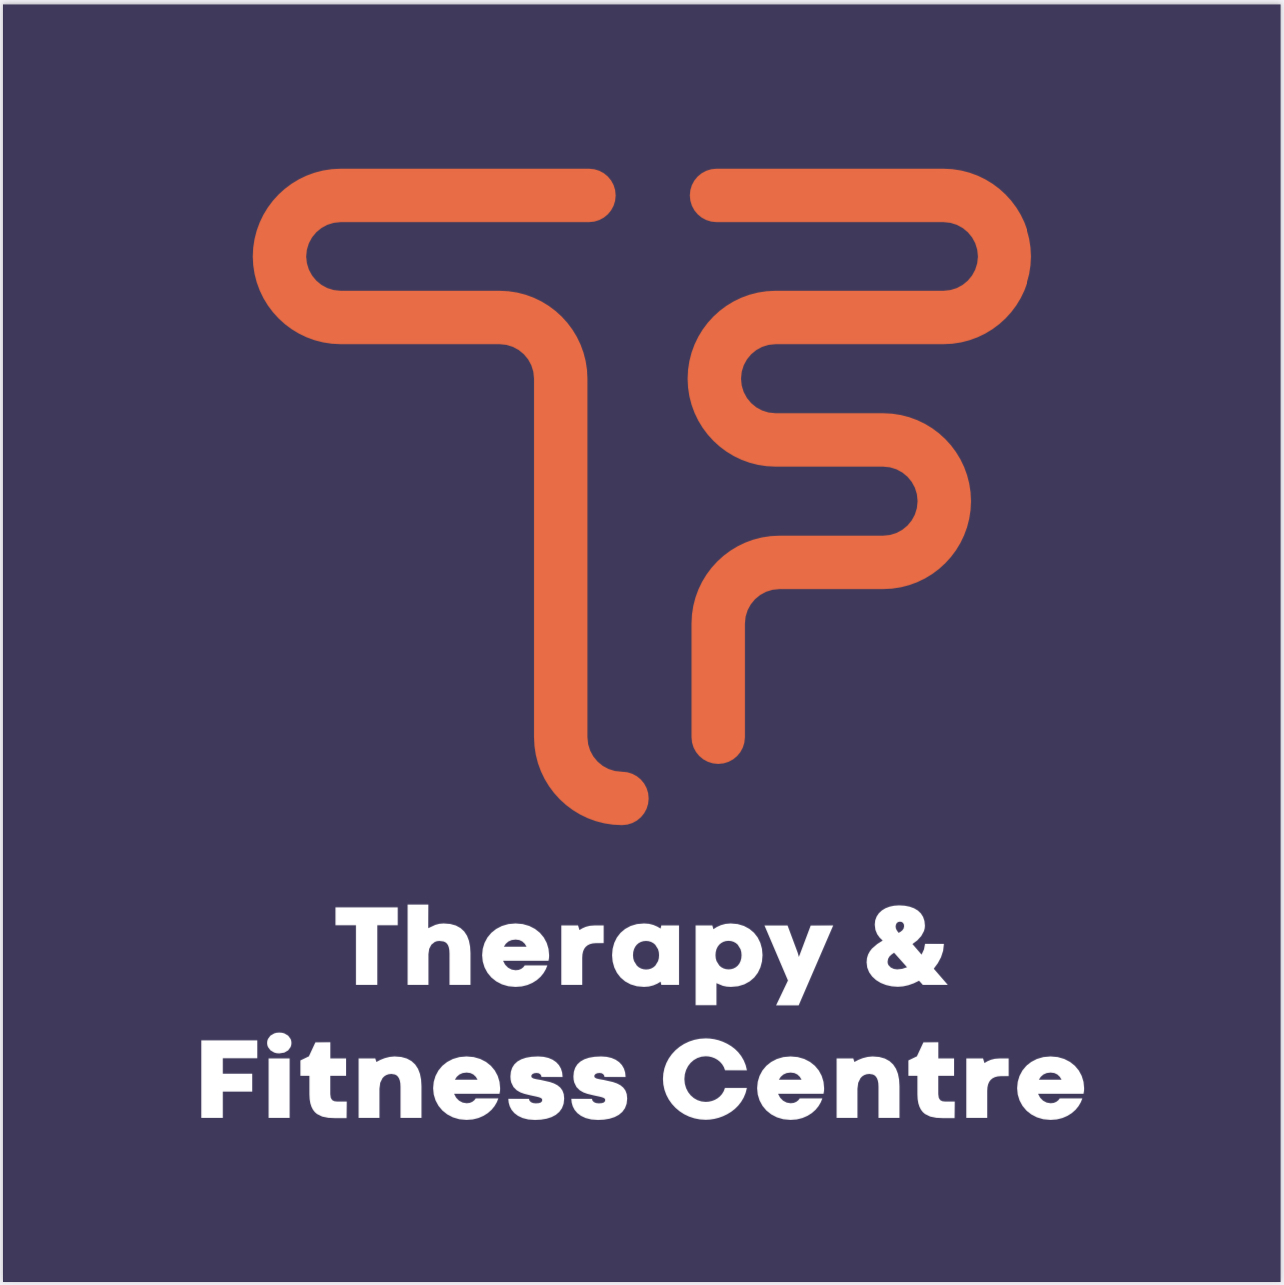 Therapy & Fitness Centre's logo